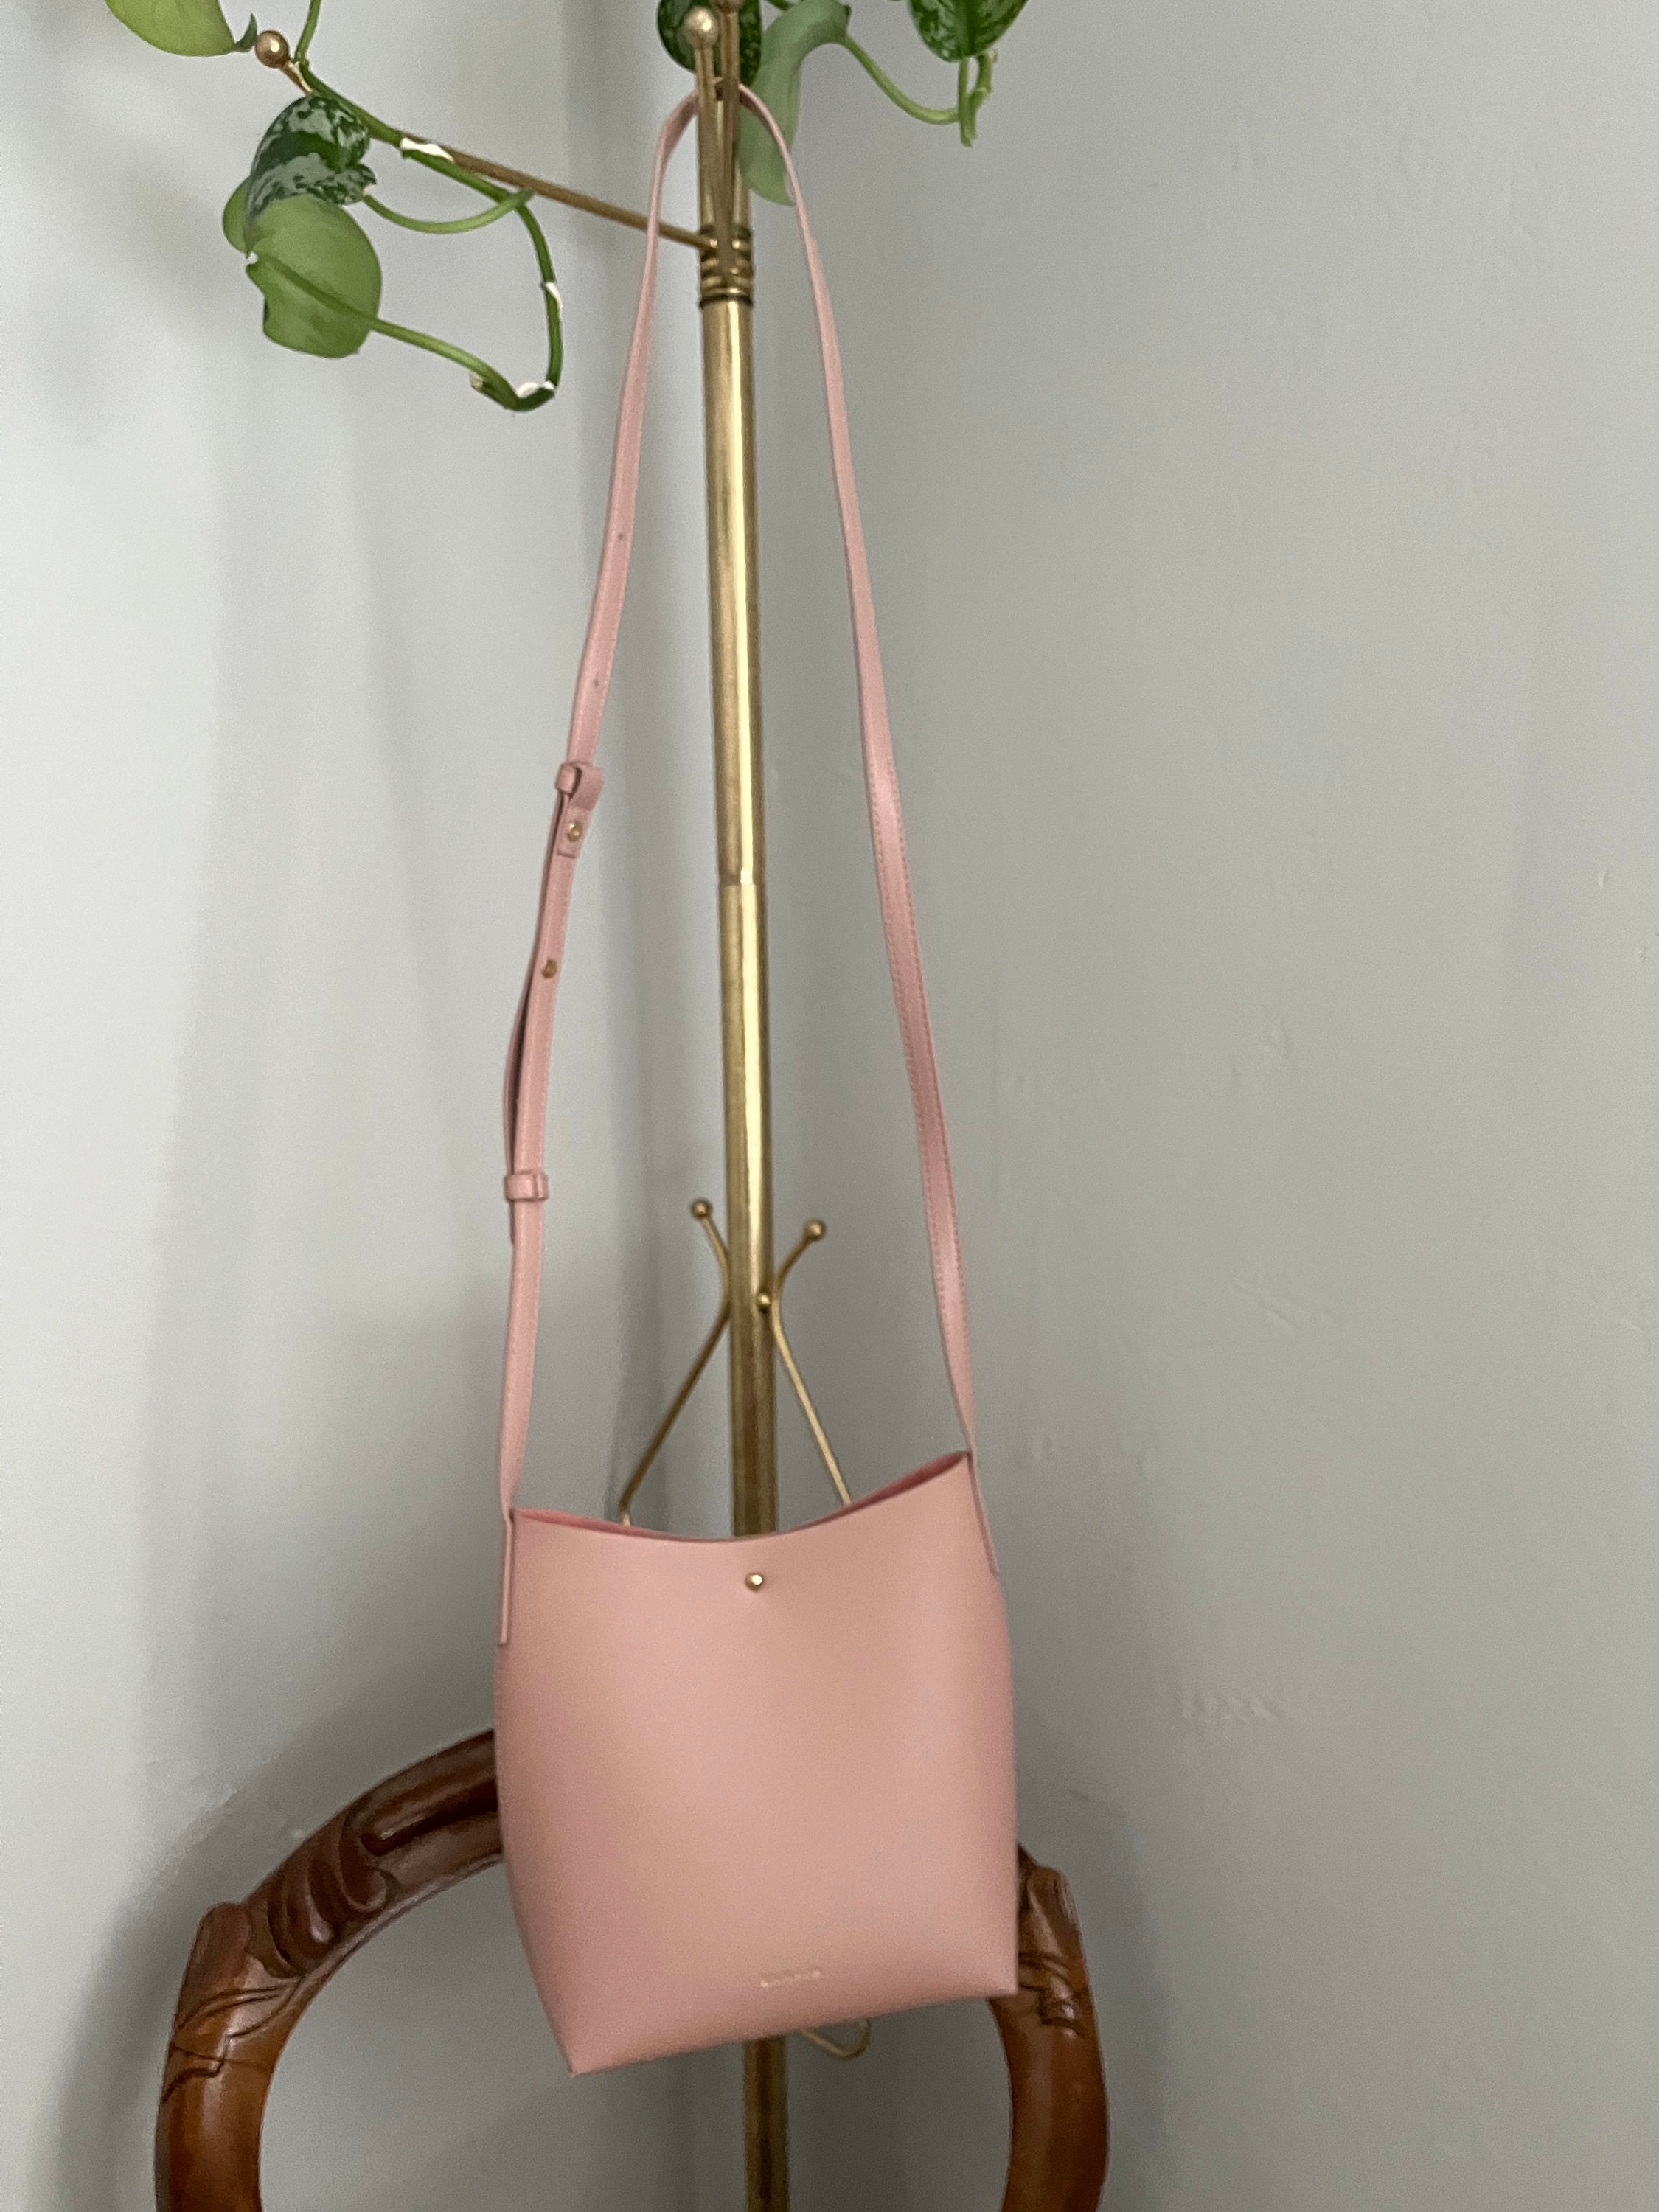 BLUSH PINK CHAIN CROSSBODY BAG, CHOOSE YOUR COLOR